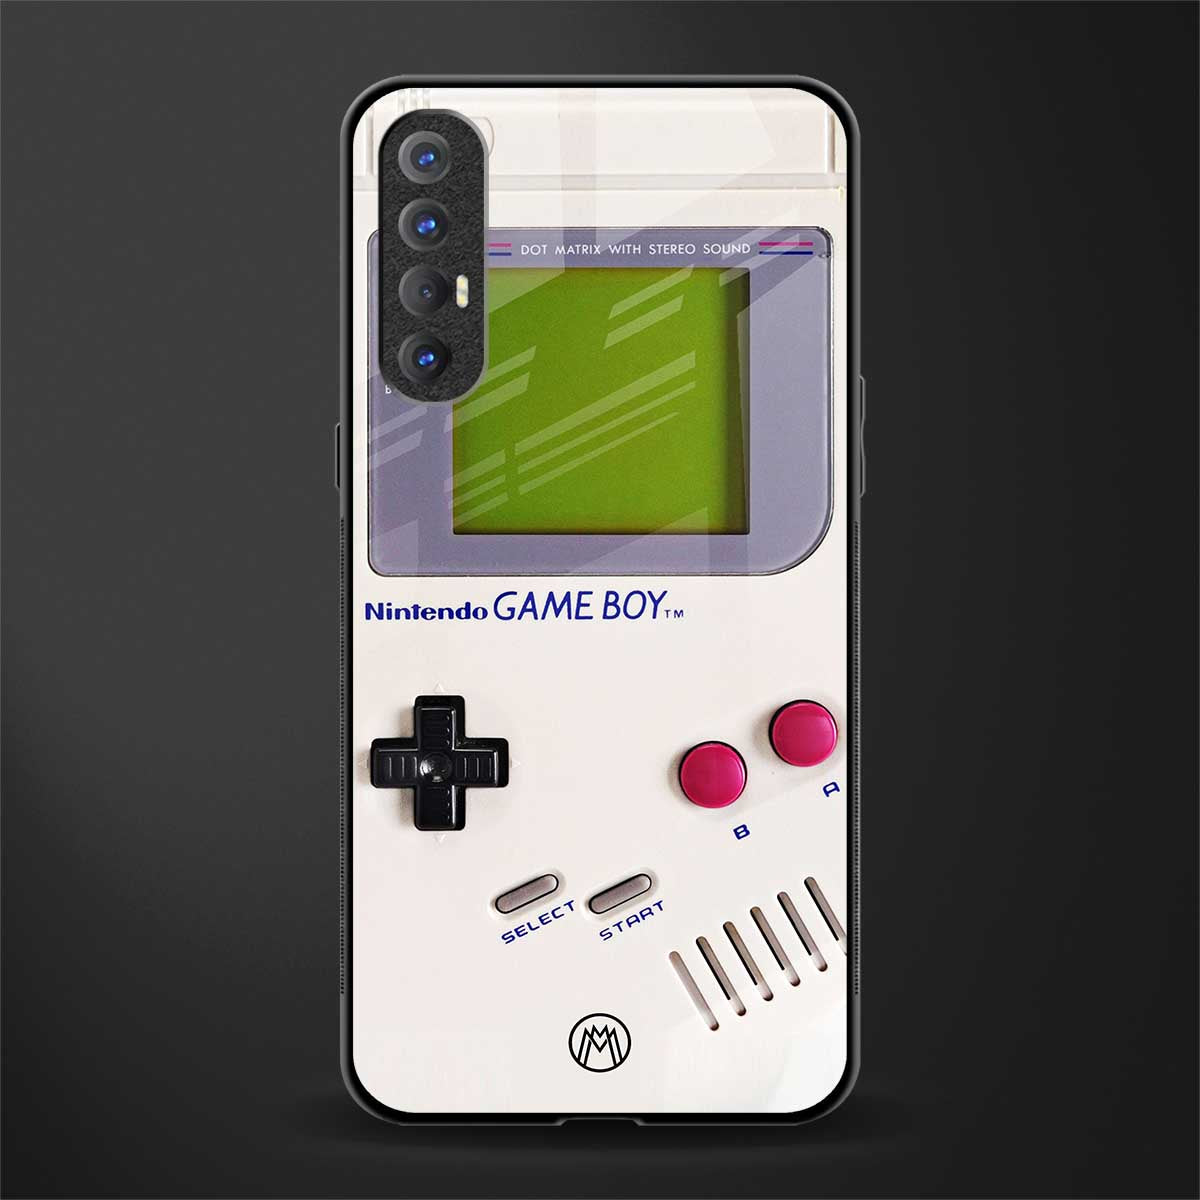 gameboy classic glass case for oppo reno 3 pro image